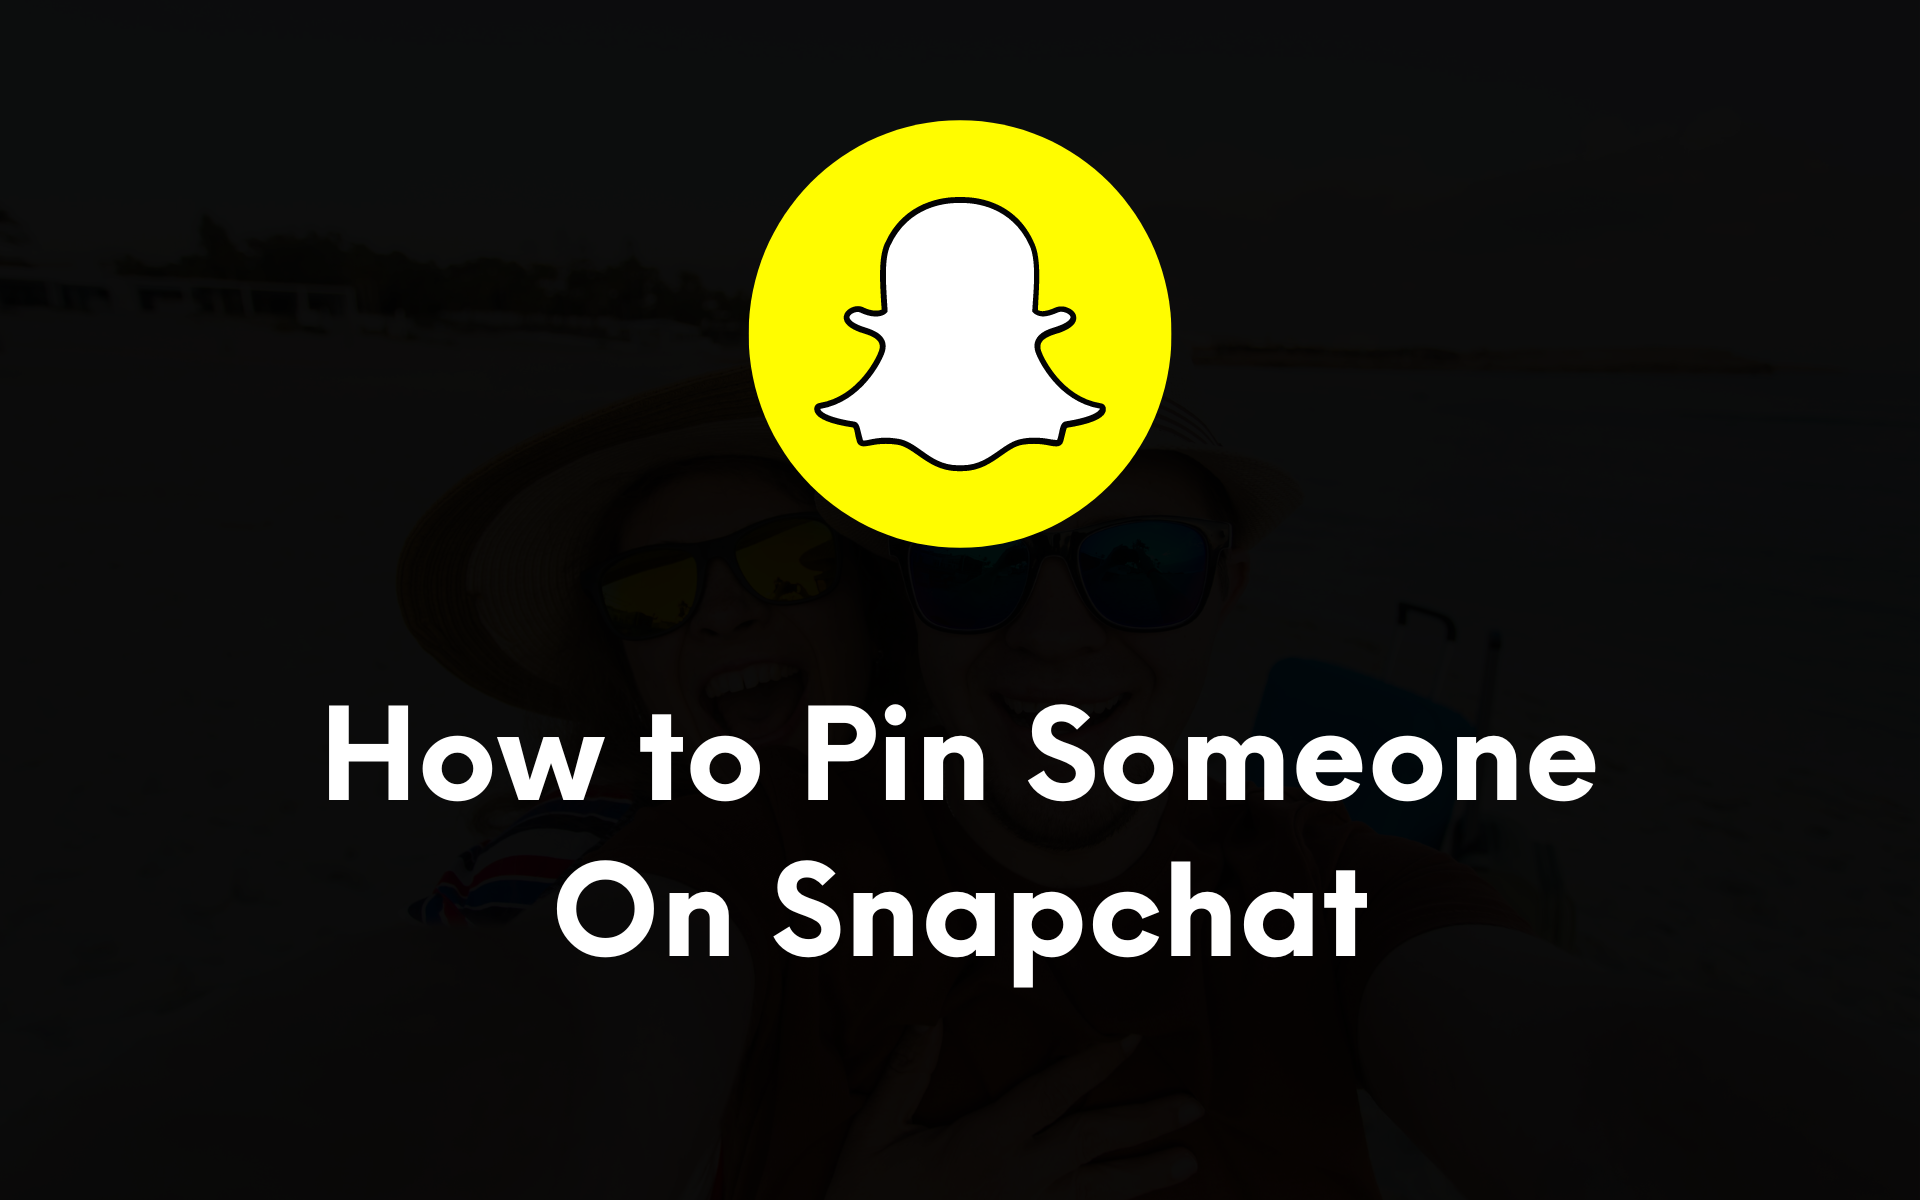 How to Pin Someone on Snapchat: